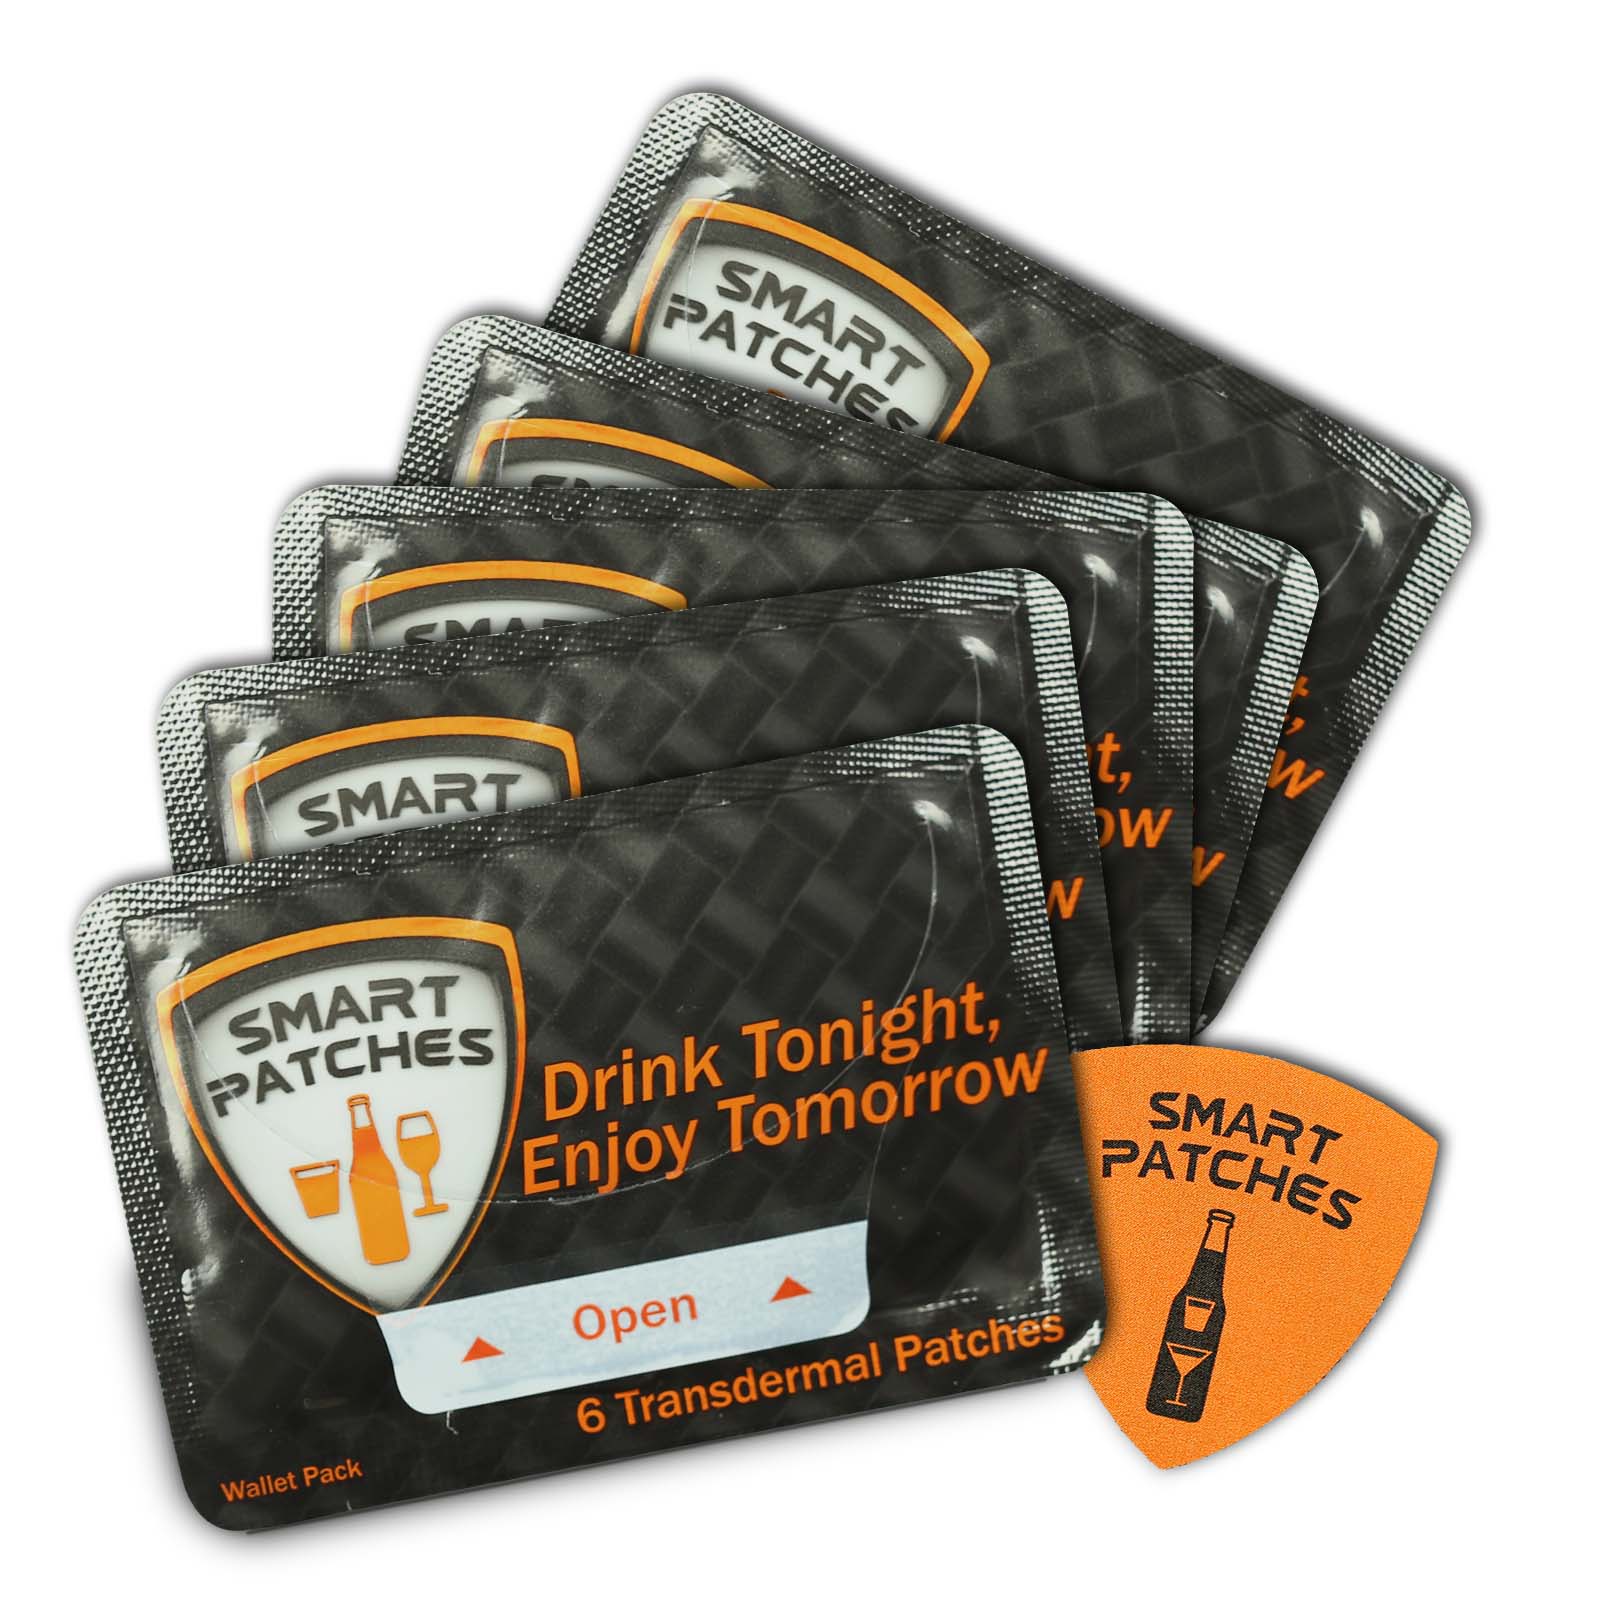 7-Pack — The Hangover Patch